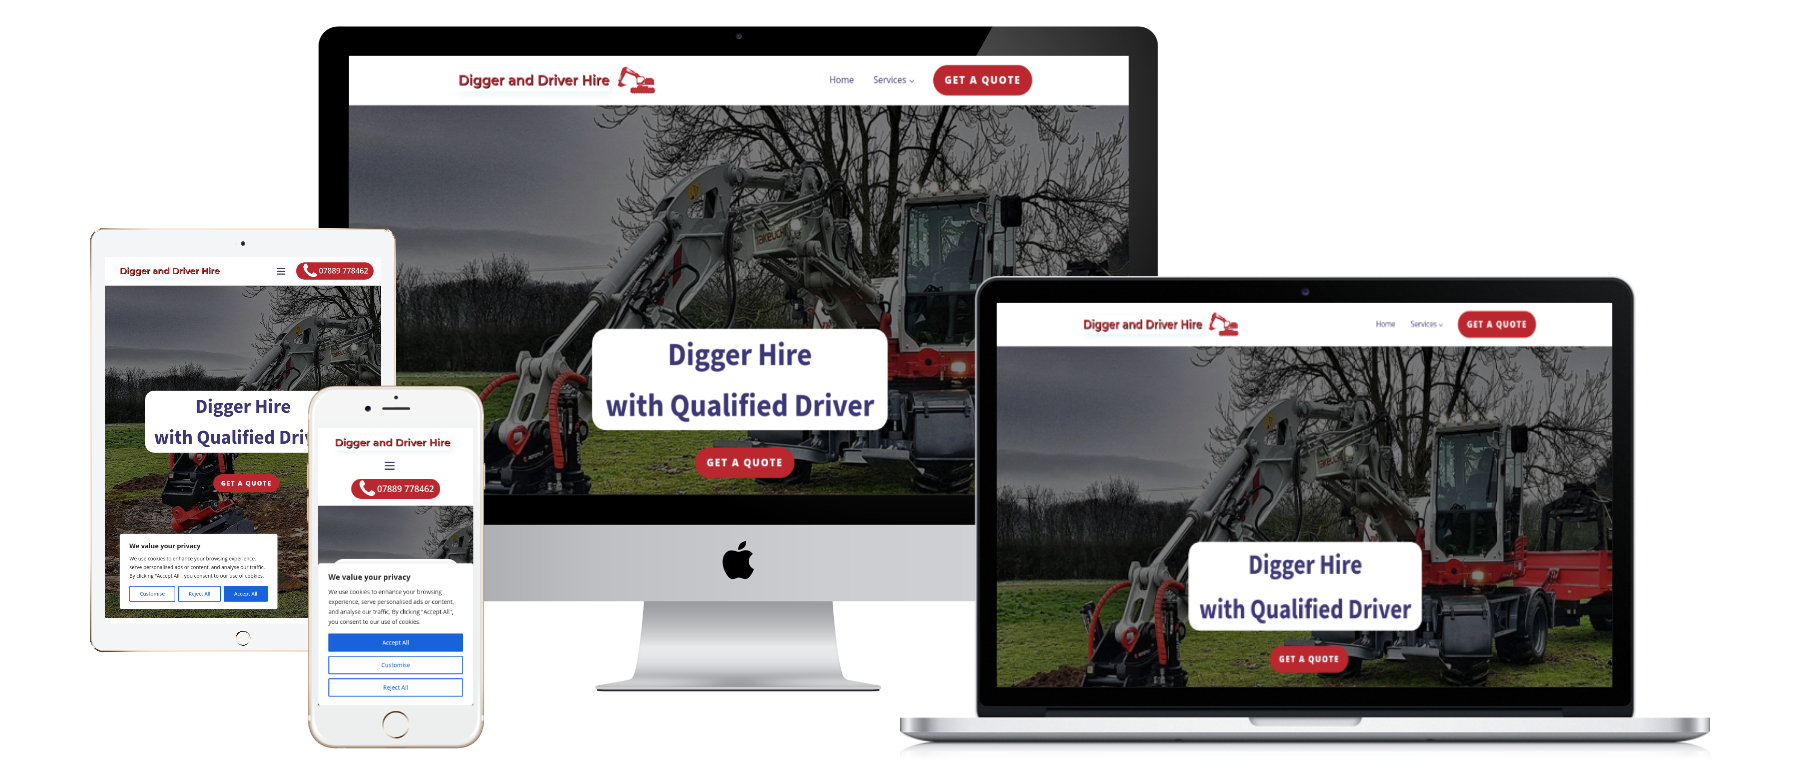 Website design for Digger and Driver Hire in Milton Keynes, shown on multiple screen sizes side by side.